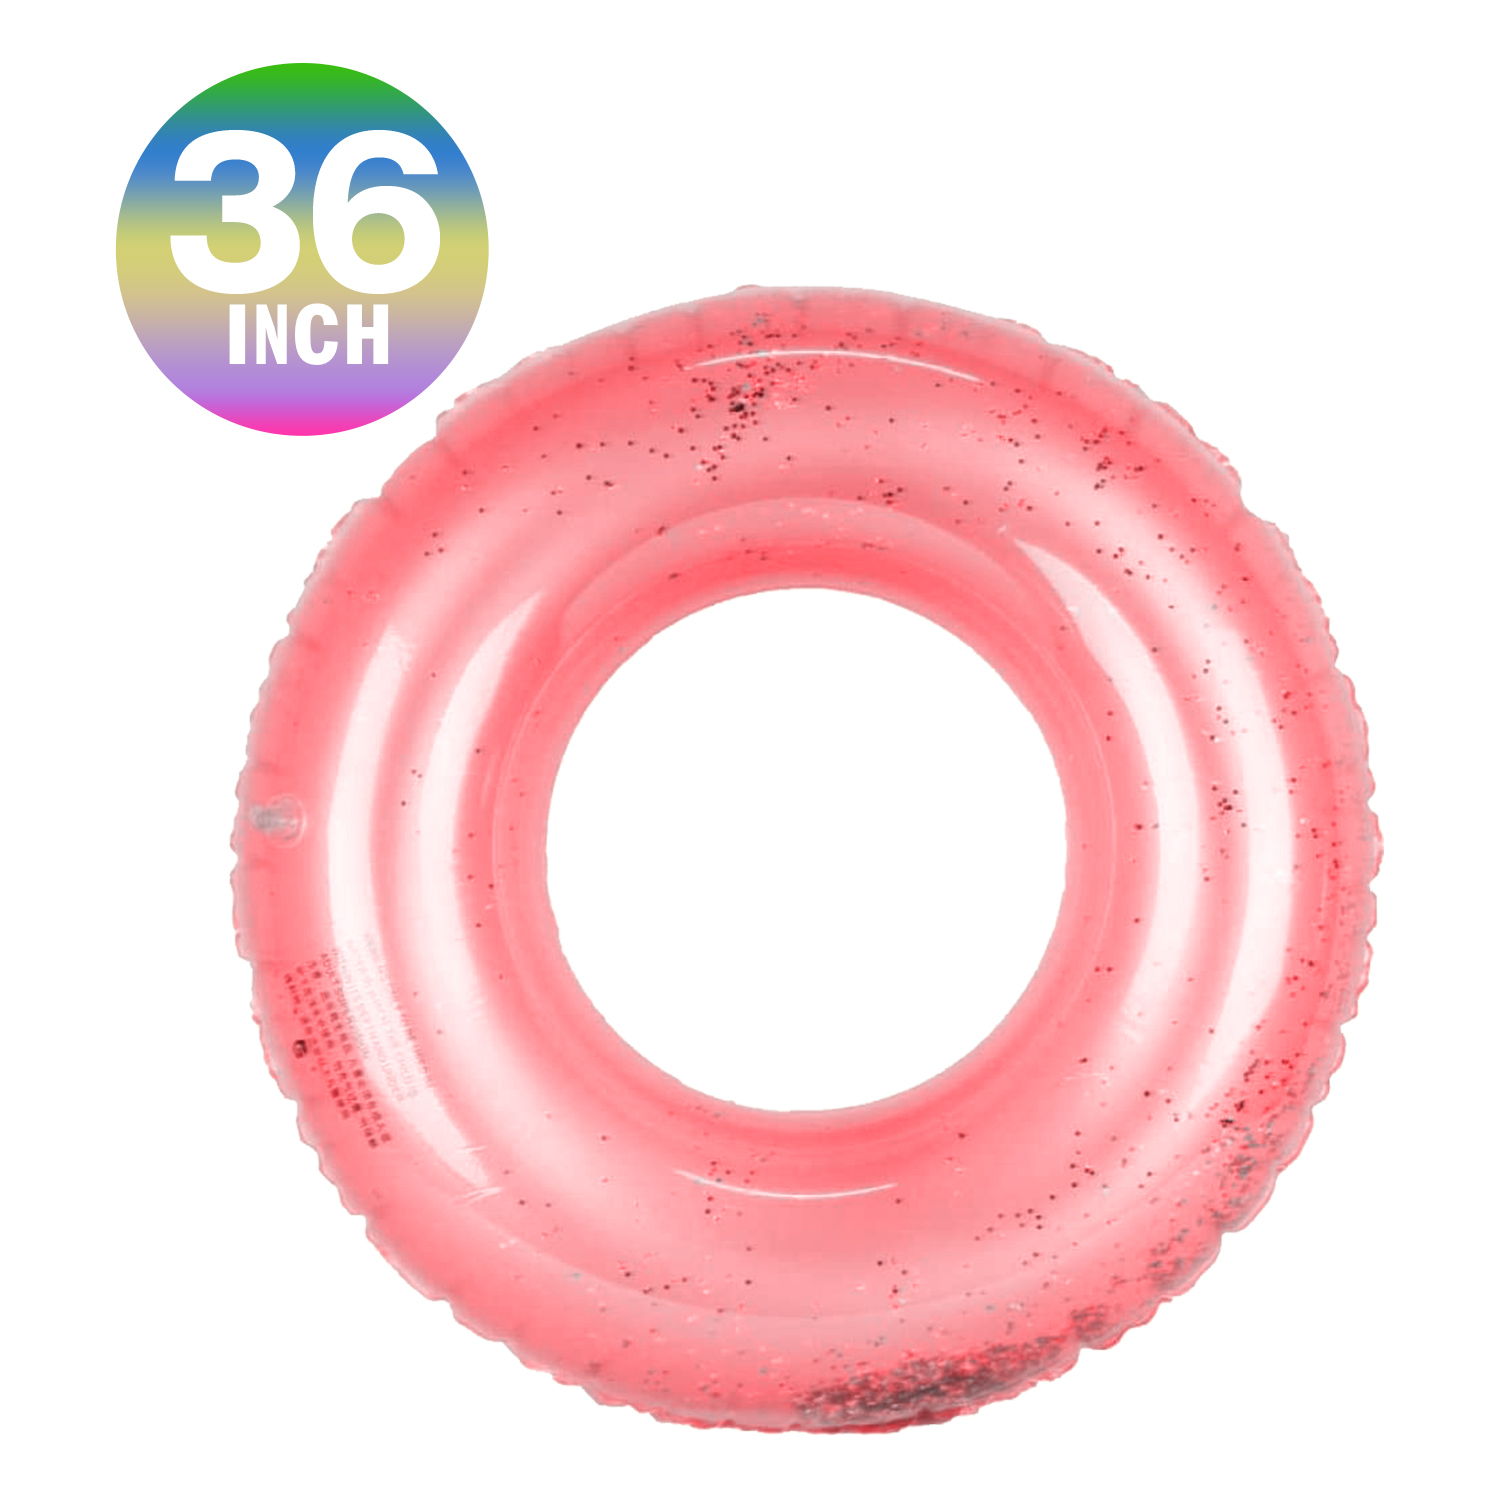 Pool Float Inflatable Floaties Glitter Sequin Pool Tube Swim Rings Pool Toys Summer Beach Toys for Adults Teenagers Girls Kids&nbsp; - image 1 of 8